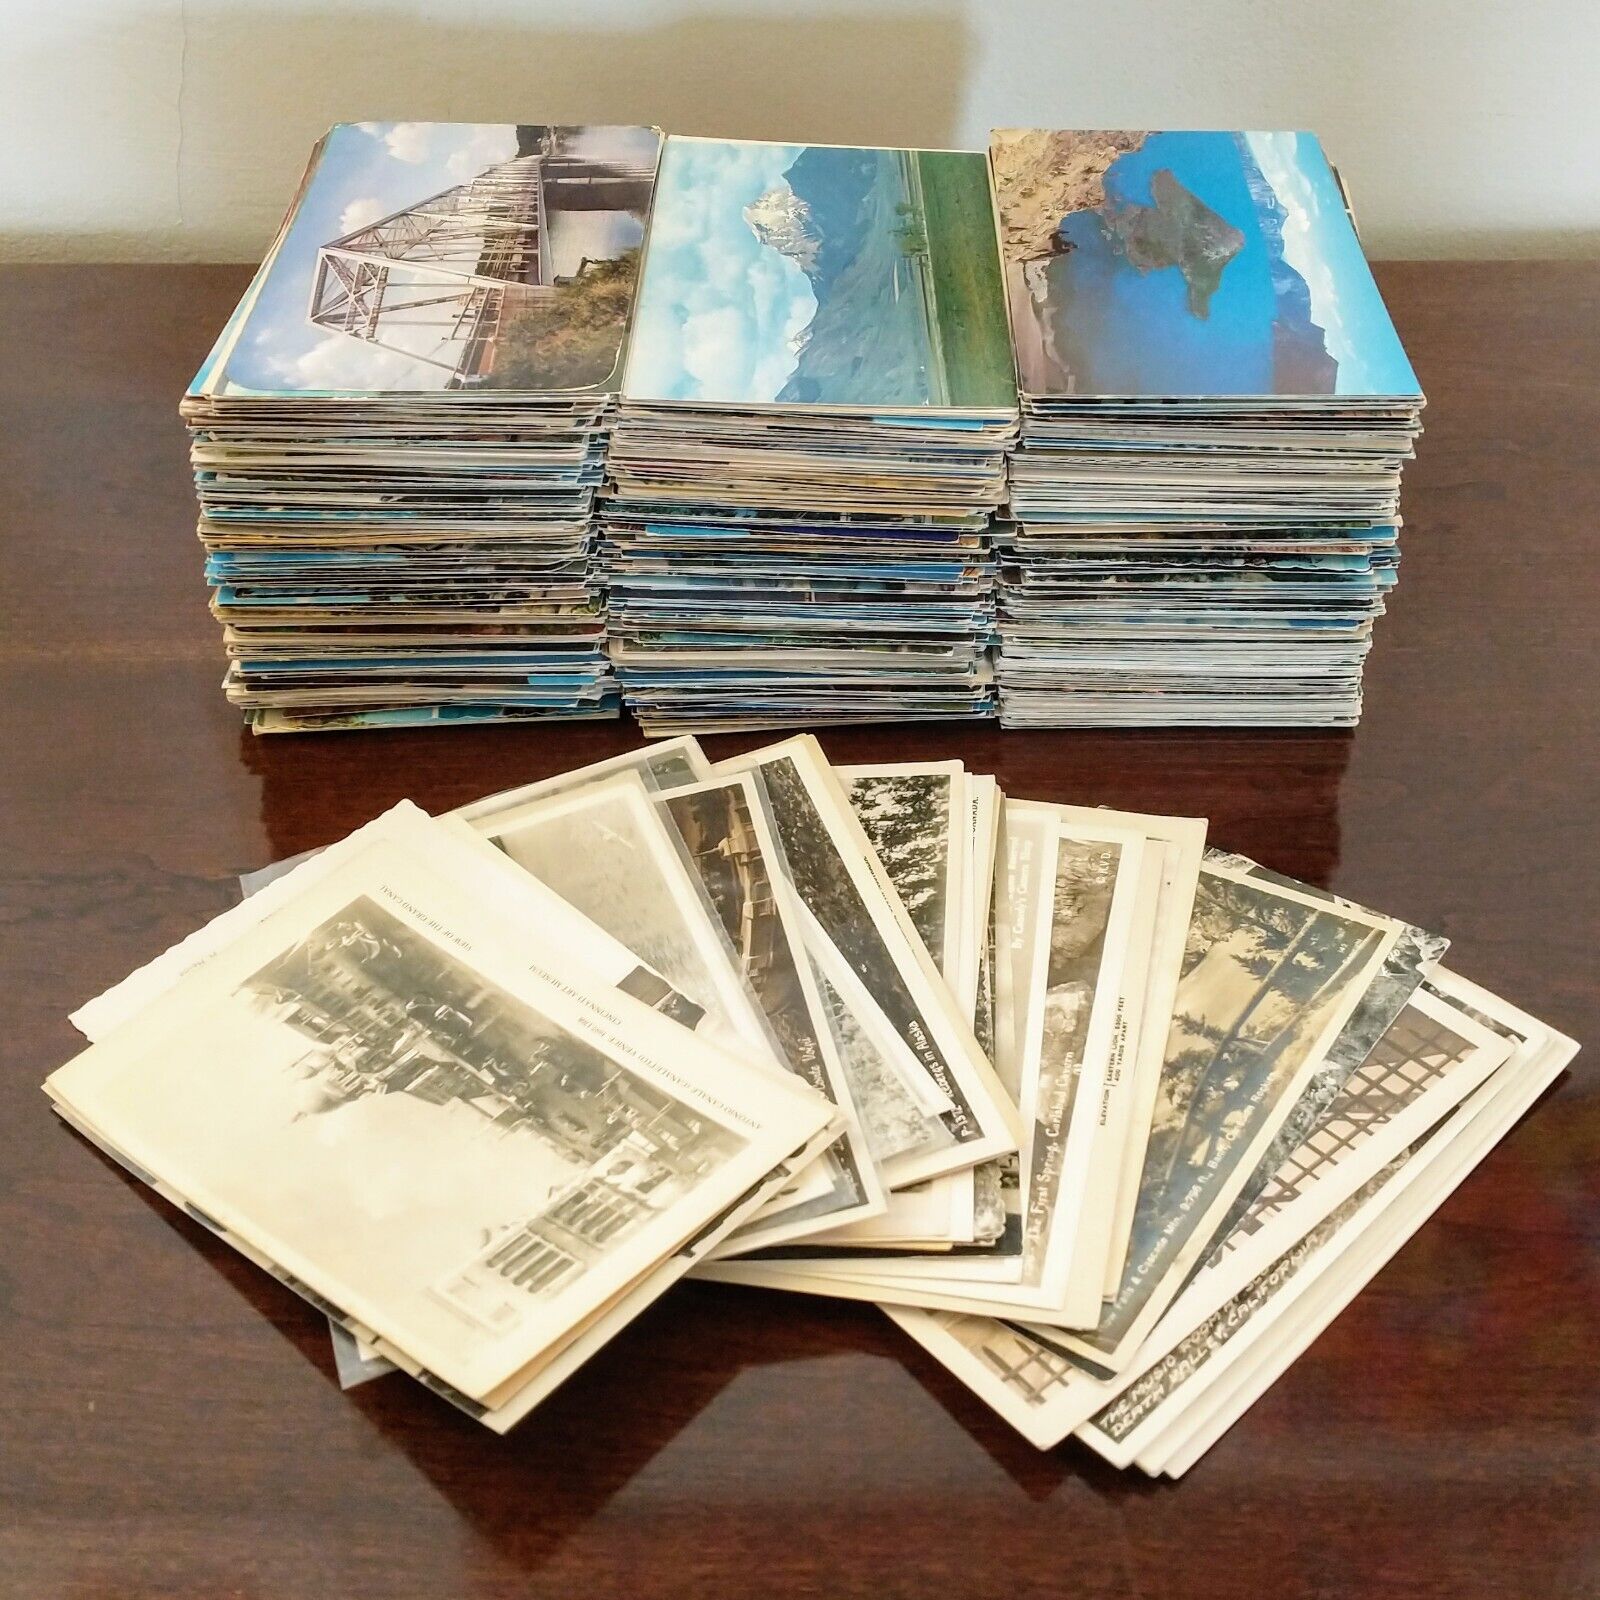 Lot of 800 Postcards: RPPC, Chrome, Linen, 1900s-1970s, Mixed Variety of Cards